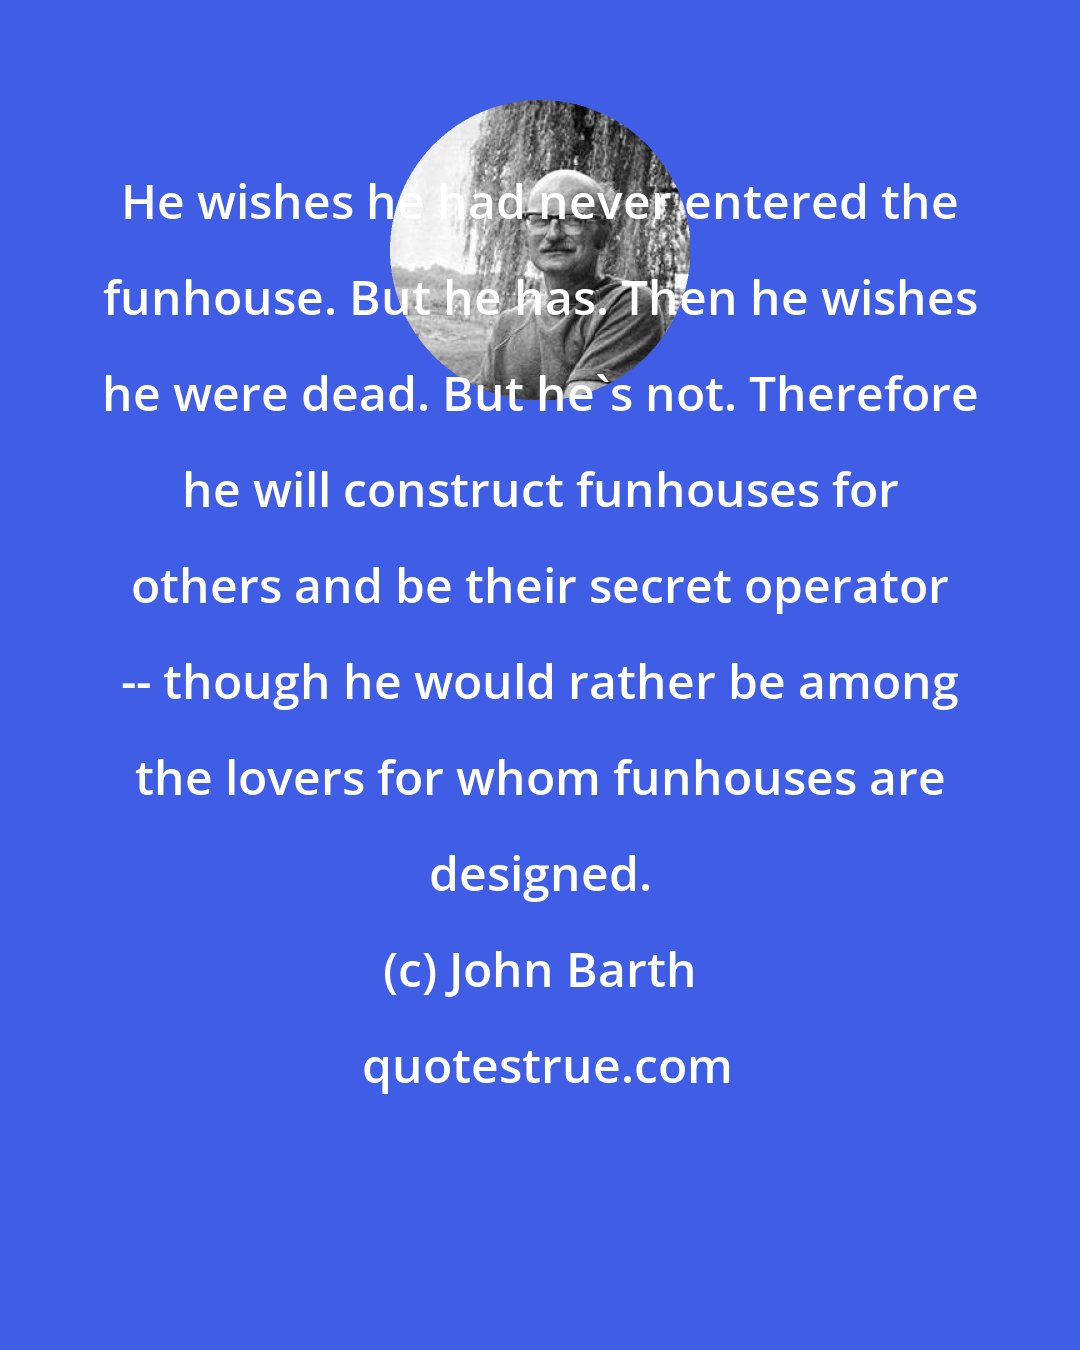 John Barth: He wishes he had never entered the funhouse. But he has. Then he wishes he were dead. But he's not. Therefore he will construct funhouses for others and be their secret operator -- though he would rather be among the lovers for whom funhouses are designed.